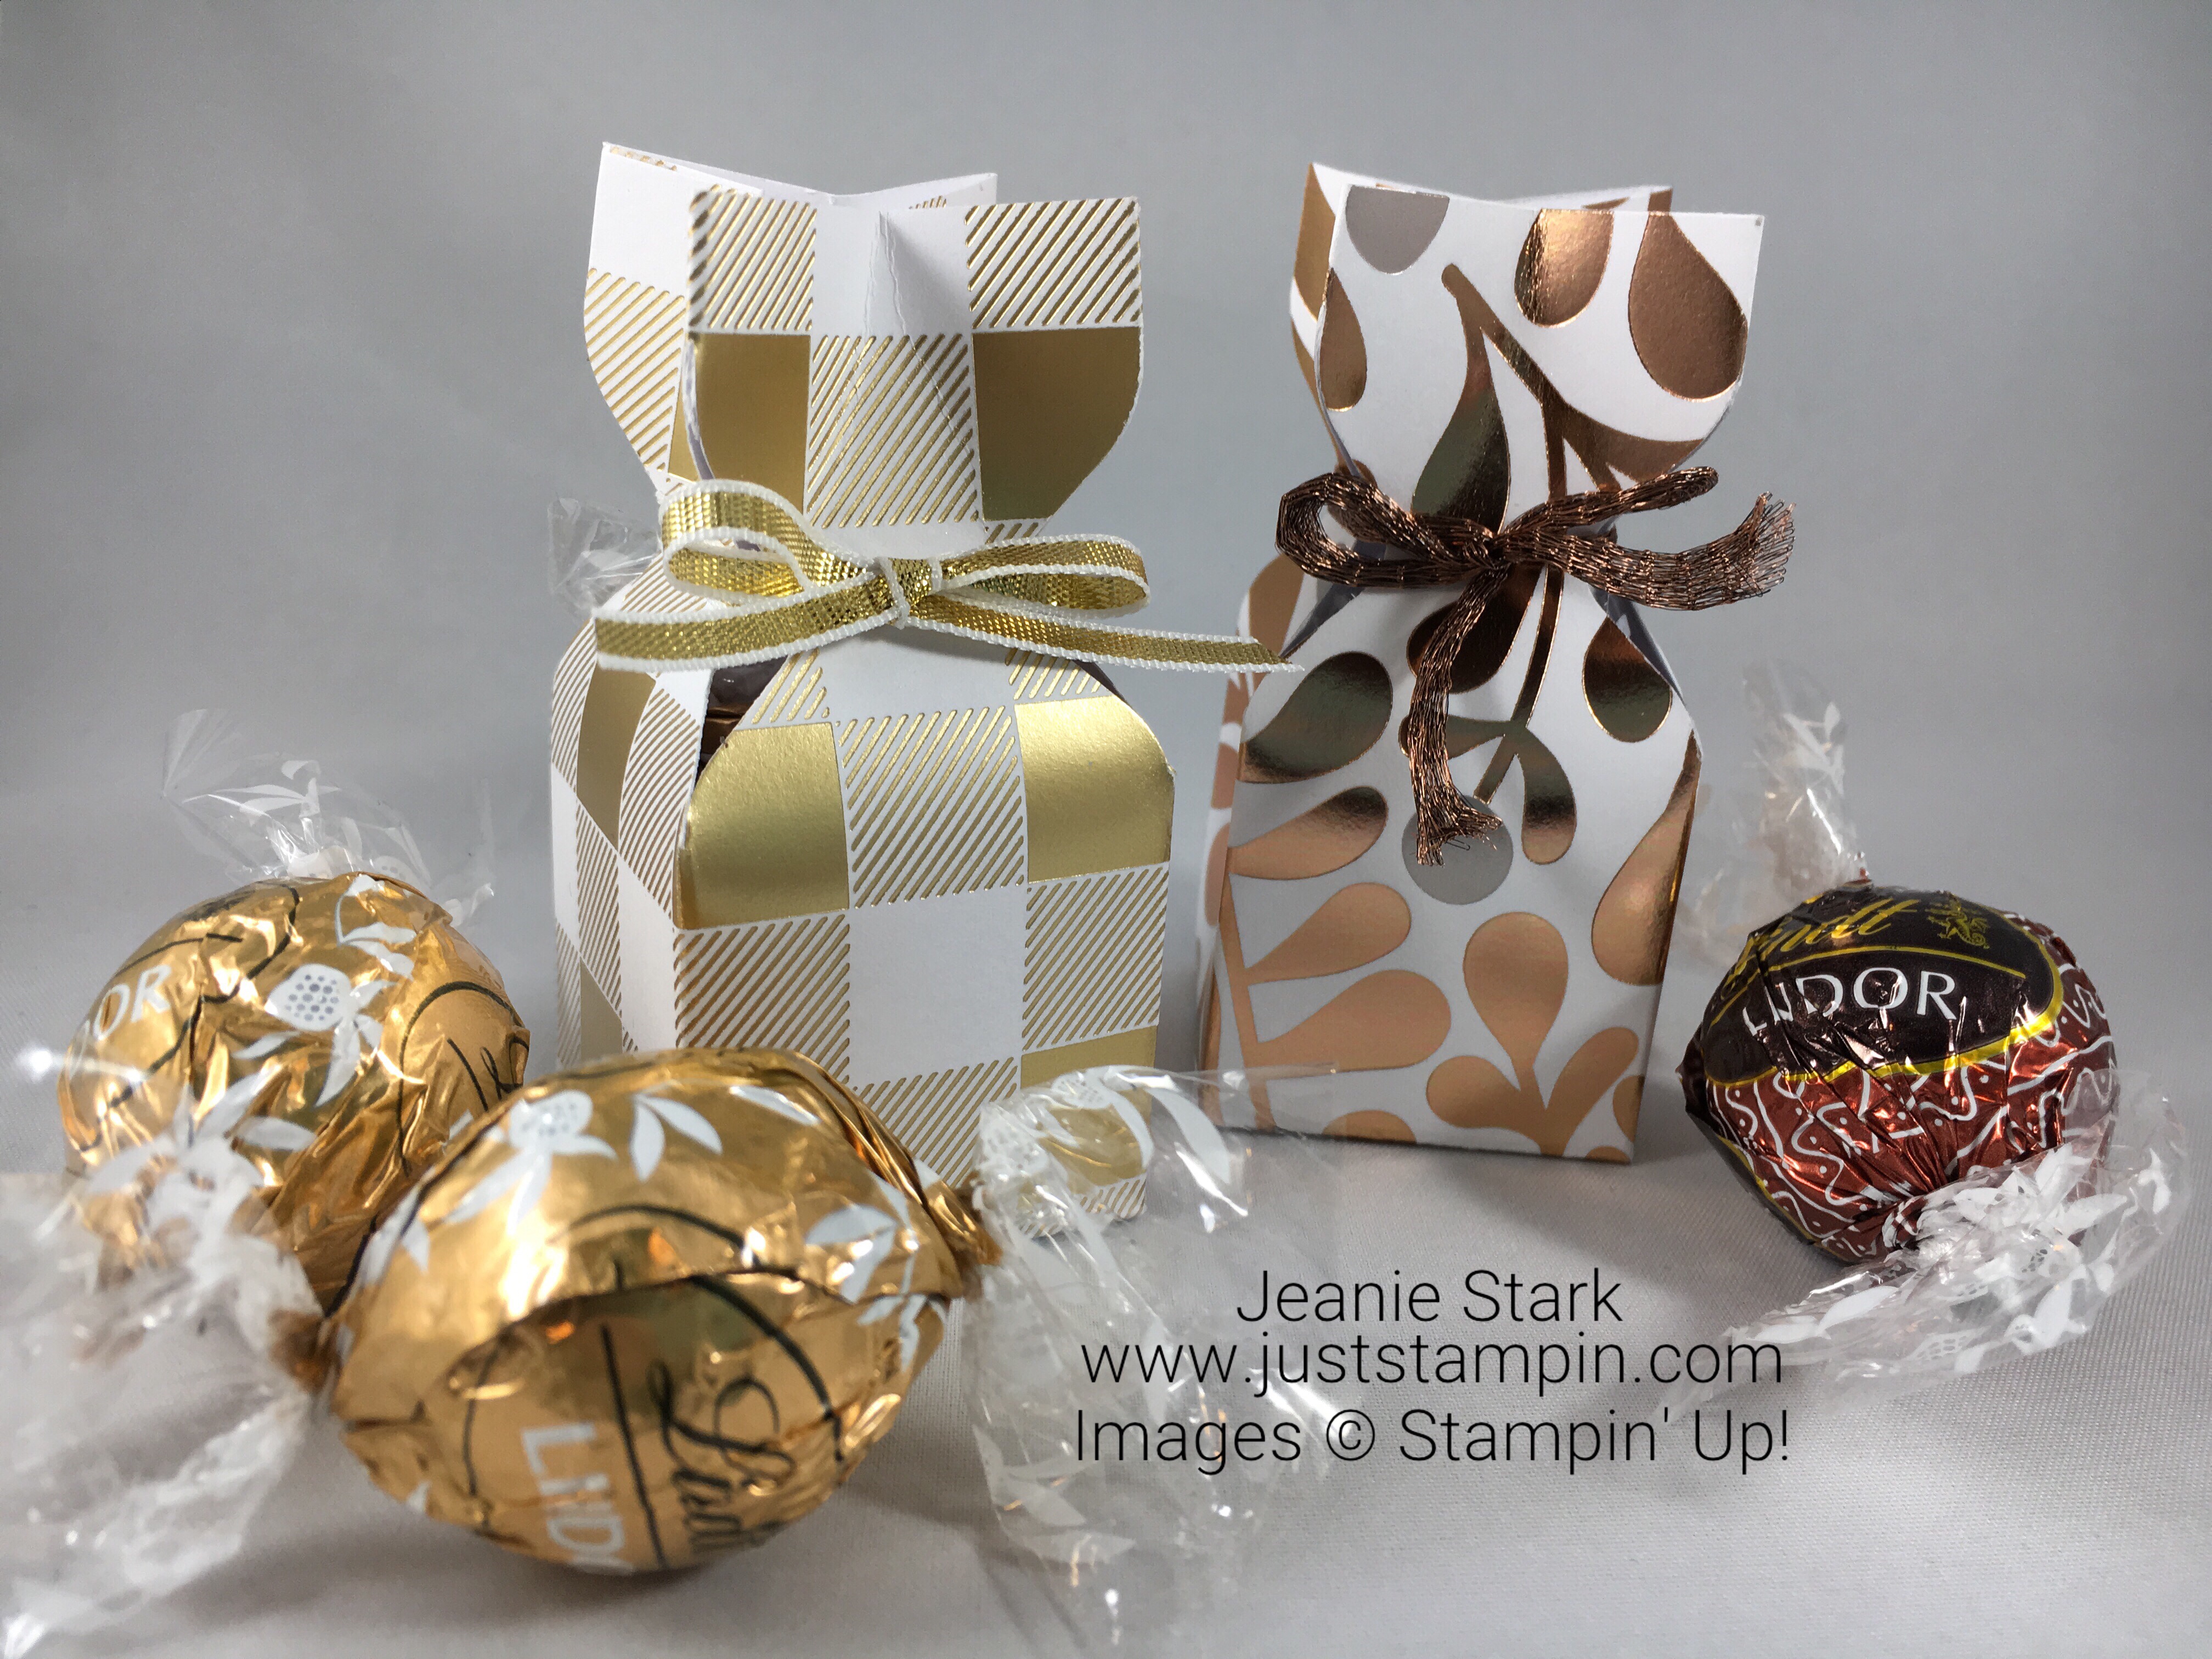 Stampin Up Year of Cheer Lindt chocolate treat holder idea - Jeanie Stark StampinUp